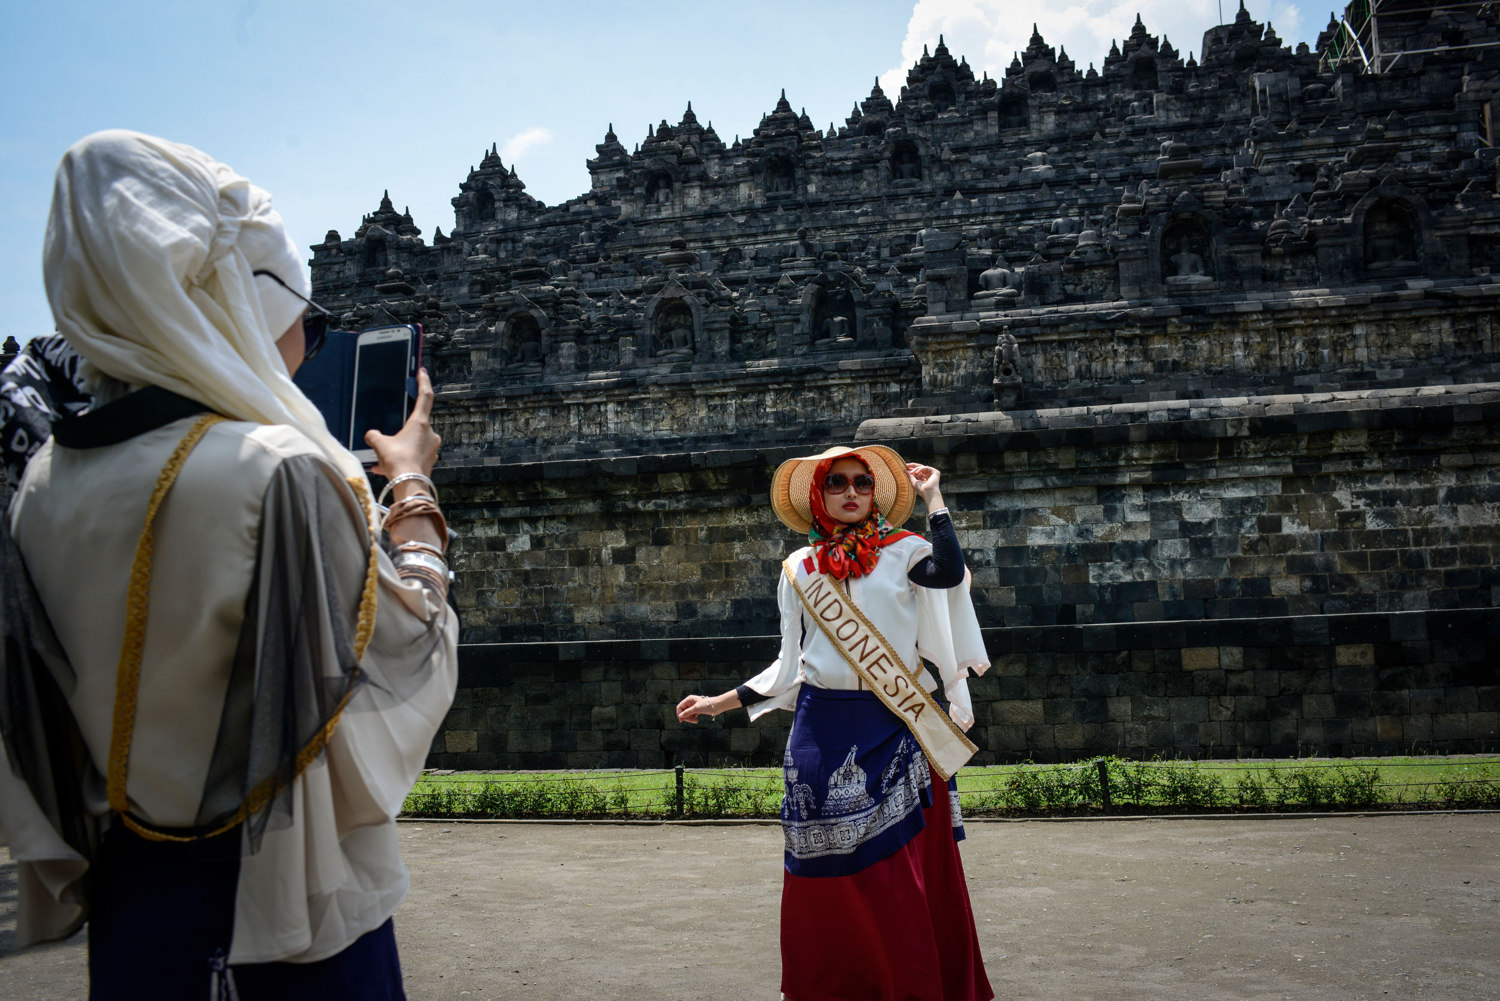  The Miss Muslimah Finalists take photos of themselves in front of Borobudur,  a 9th-century Mahayana Buddhist Temple outside of Yogakarta, Indonesia. 
 